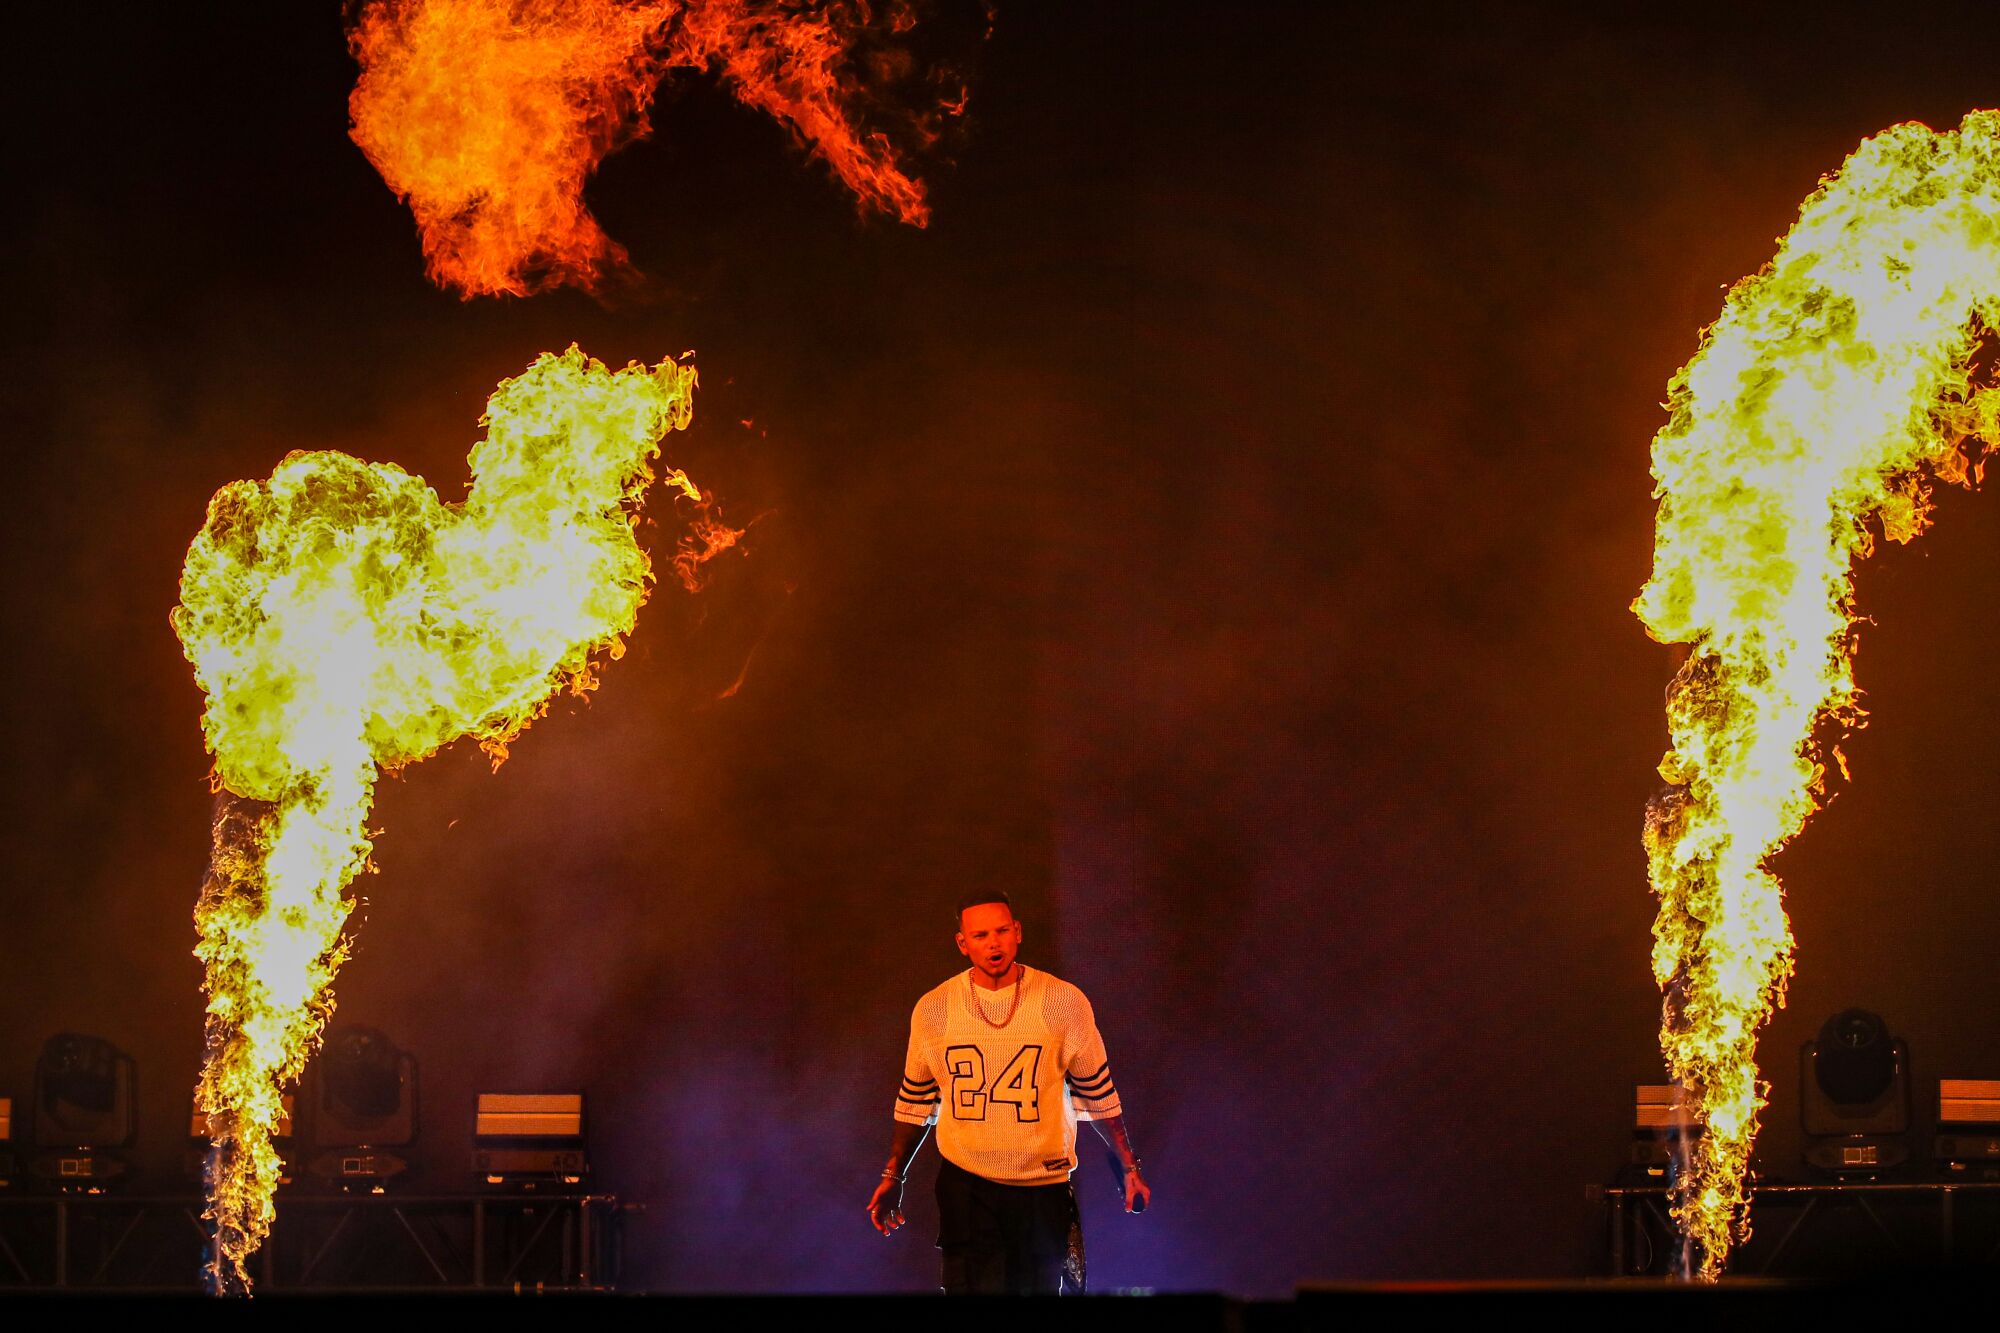 A man in a sports jersey stands on stage while flanked by tall vertical jets of fire.